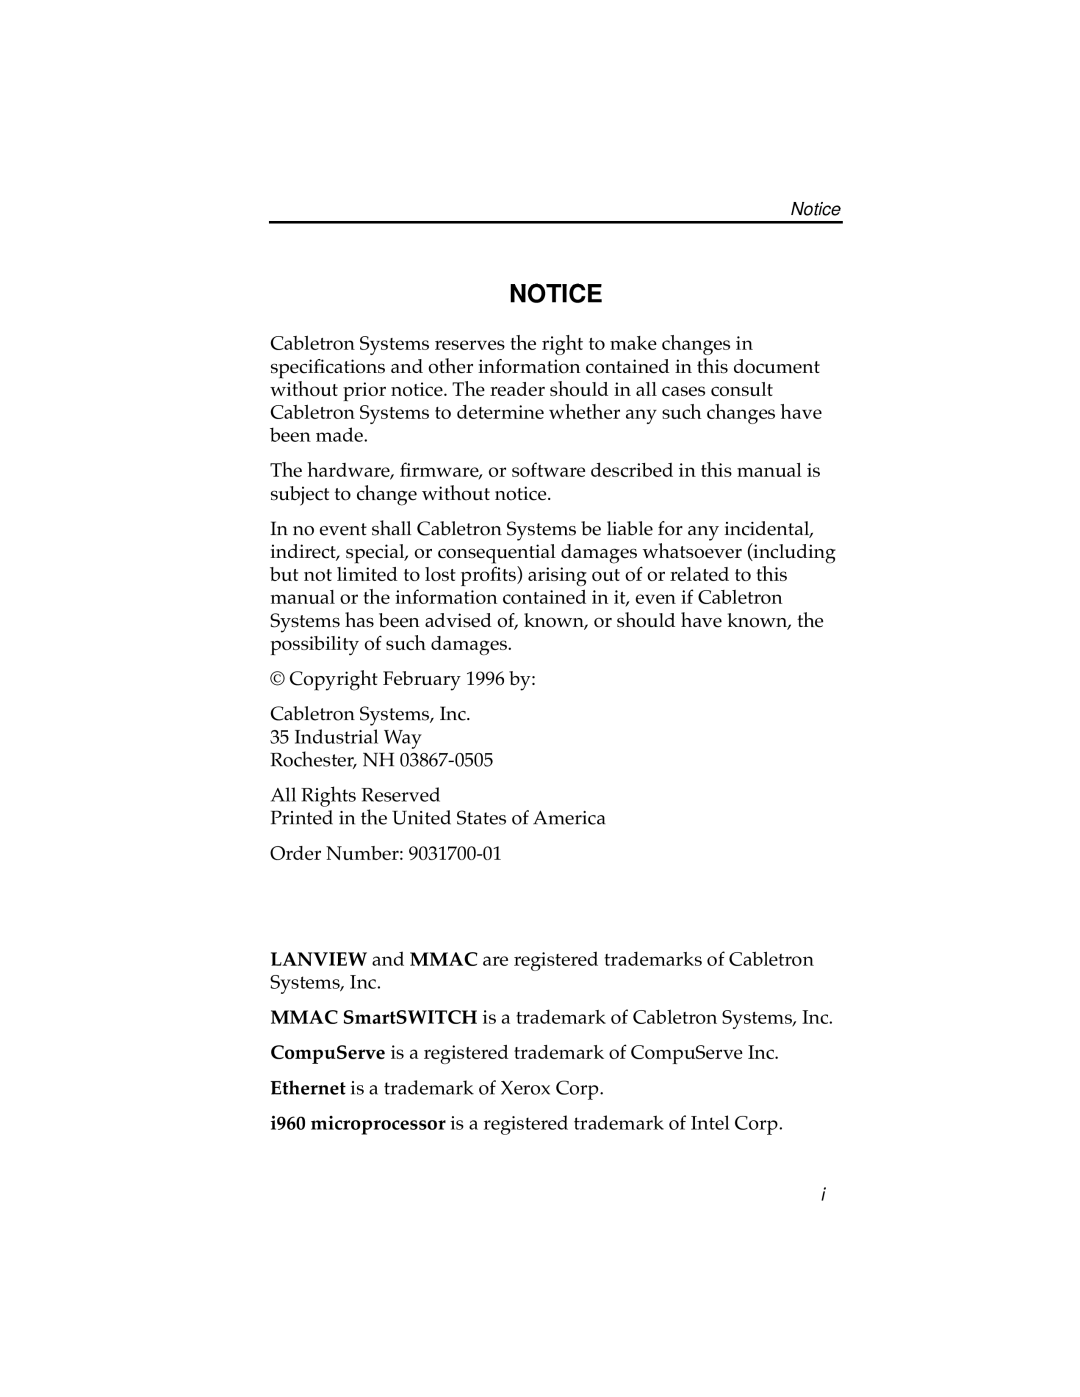 Cabletron Systems 7C04 Workgroup manual Copyright February 1996 by Cabletron Systems, Inc 35 Industrial Way 